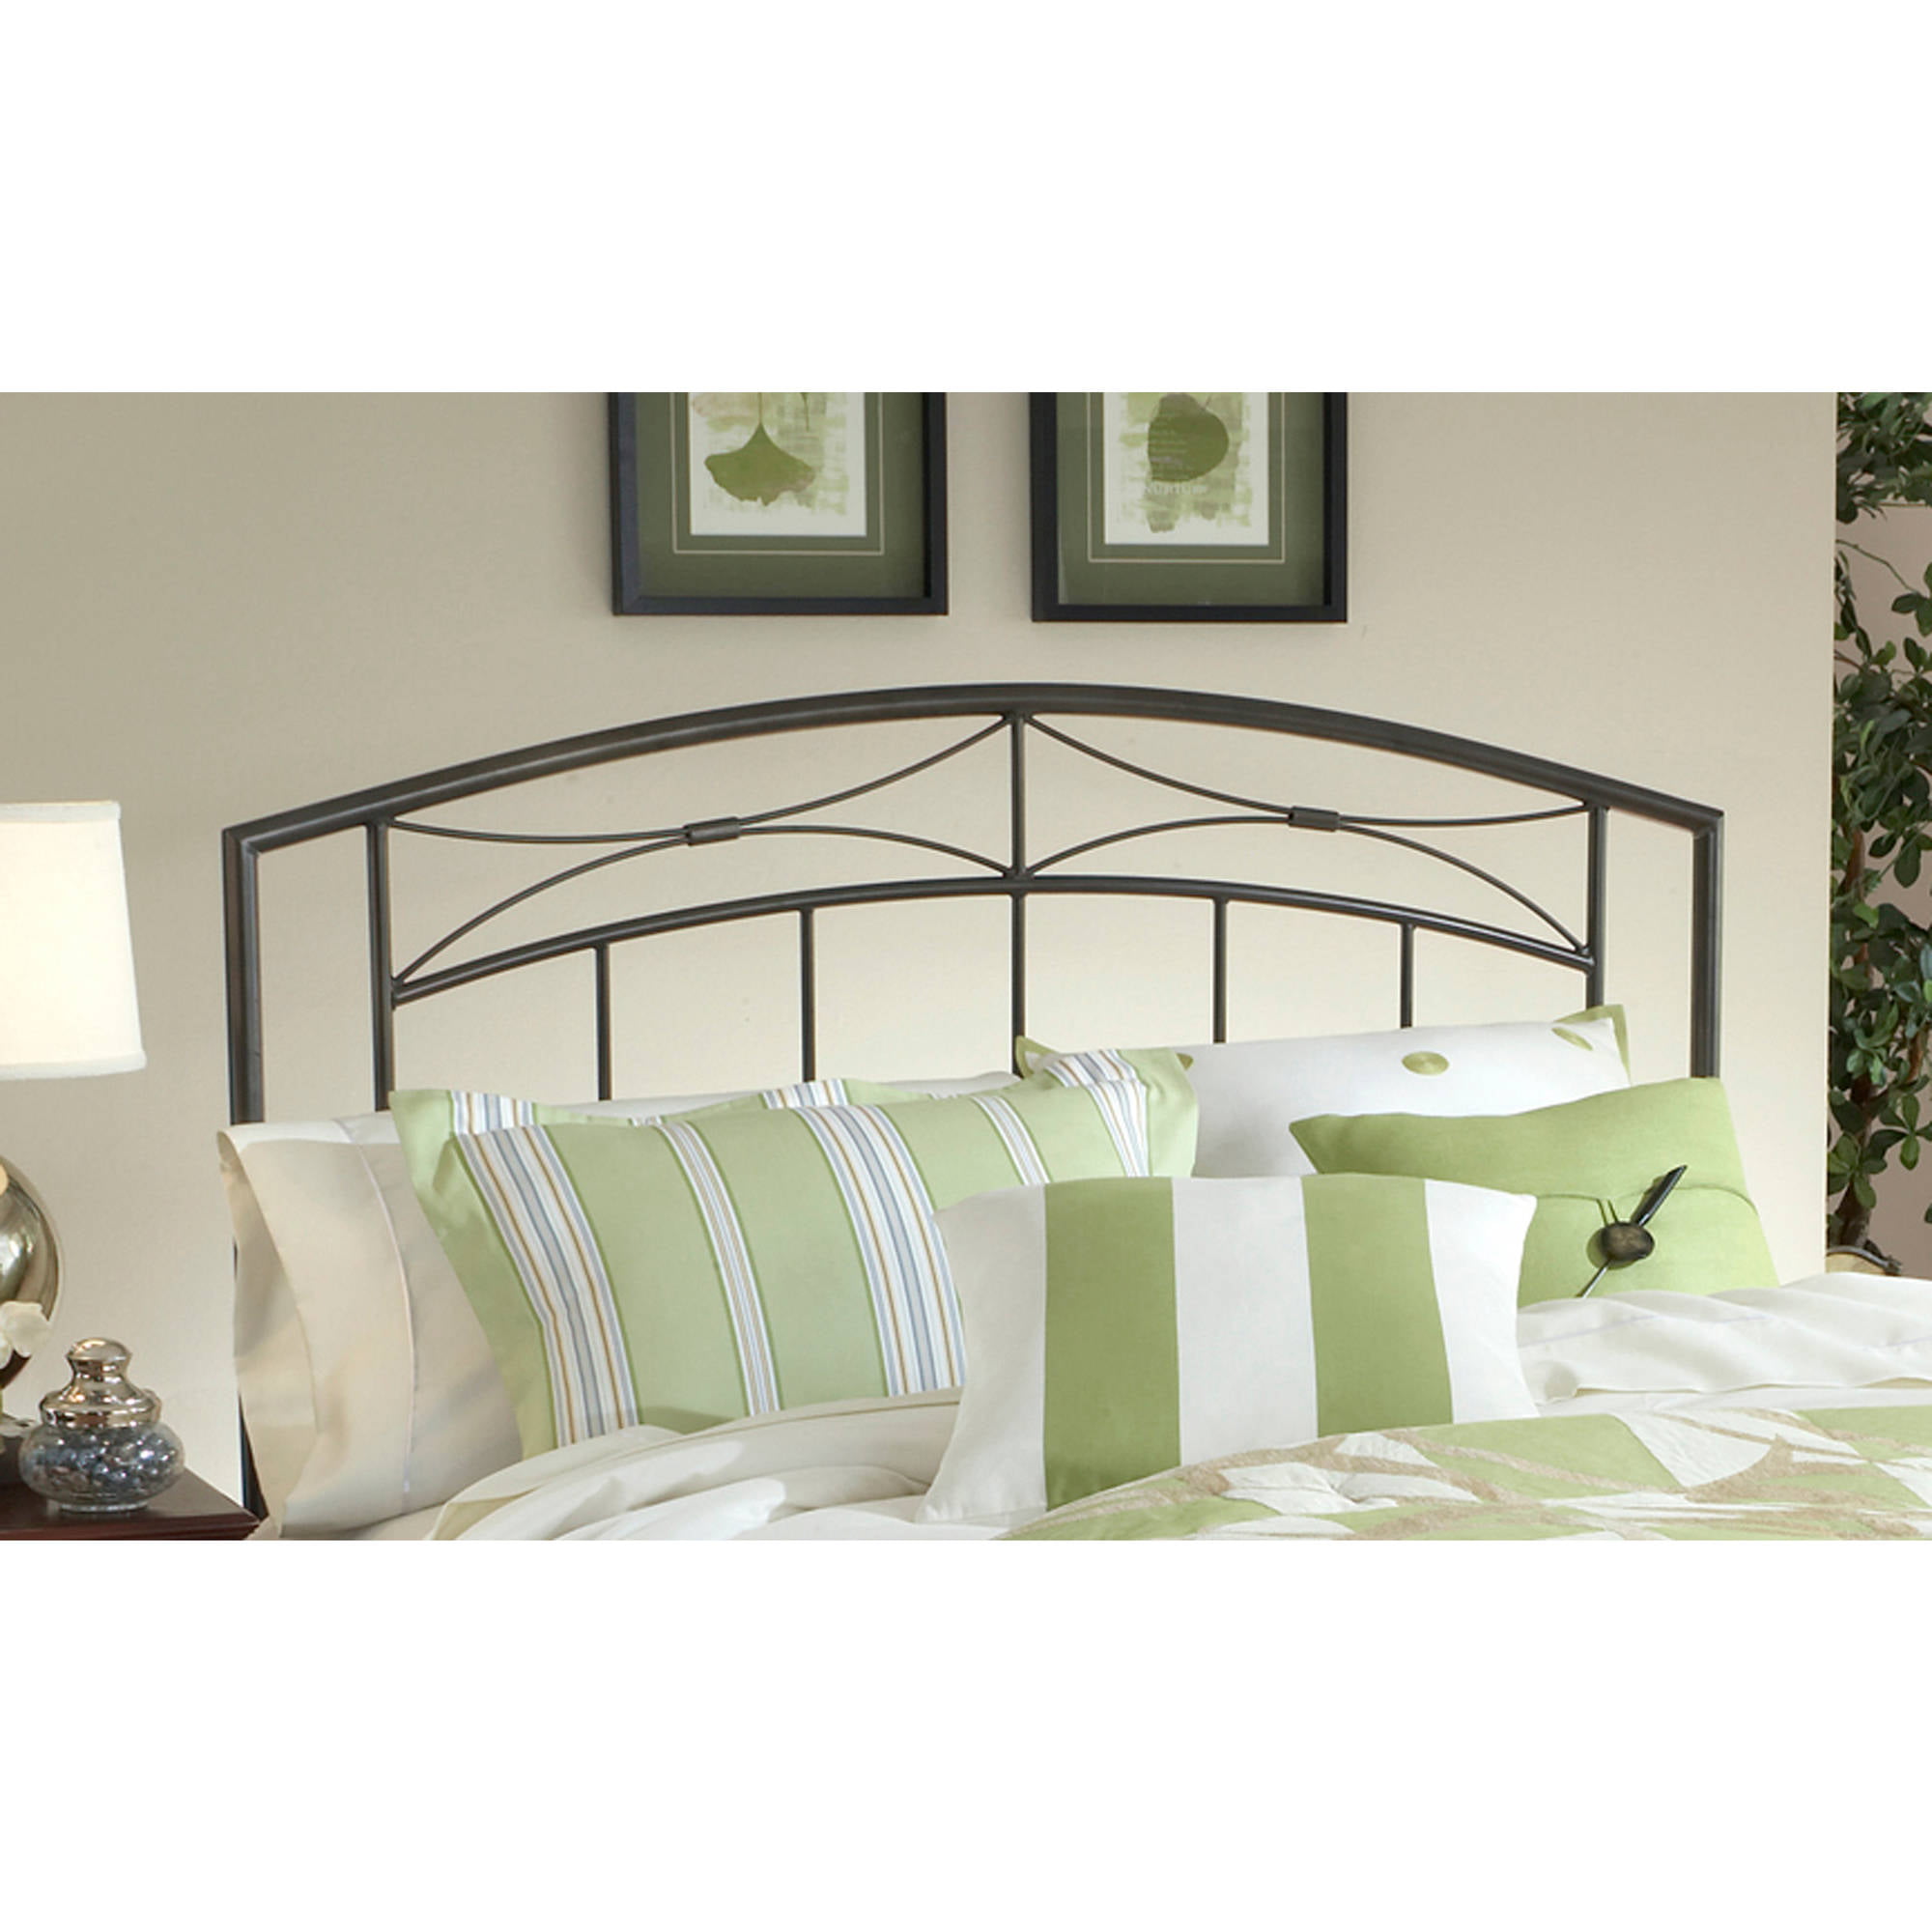 Hillsdale Furniture Imperial Full / Queen Metal Headboard with Bed